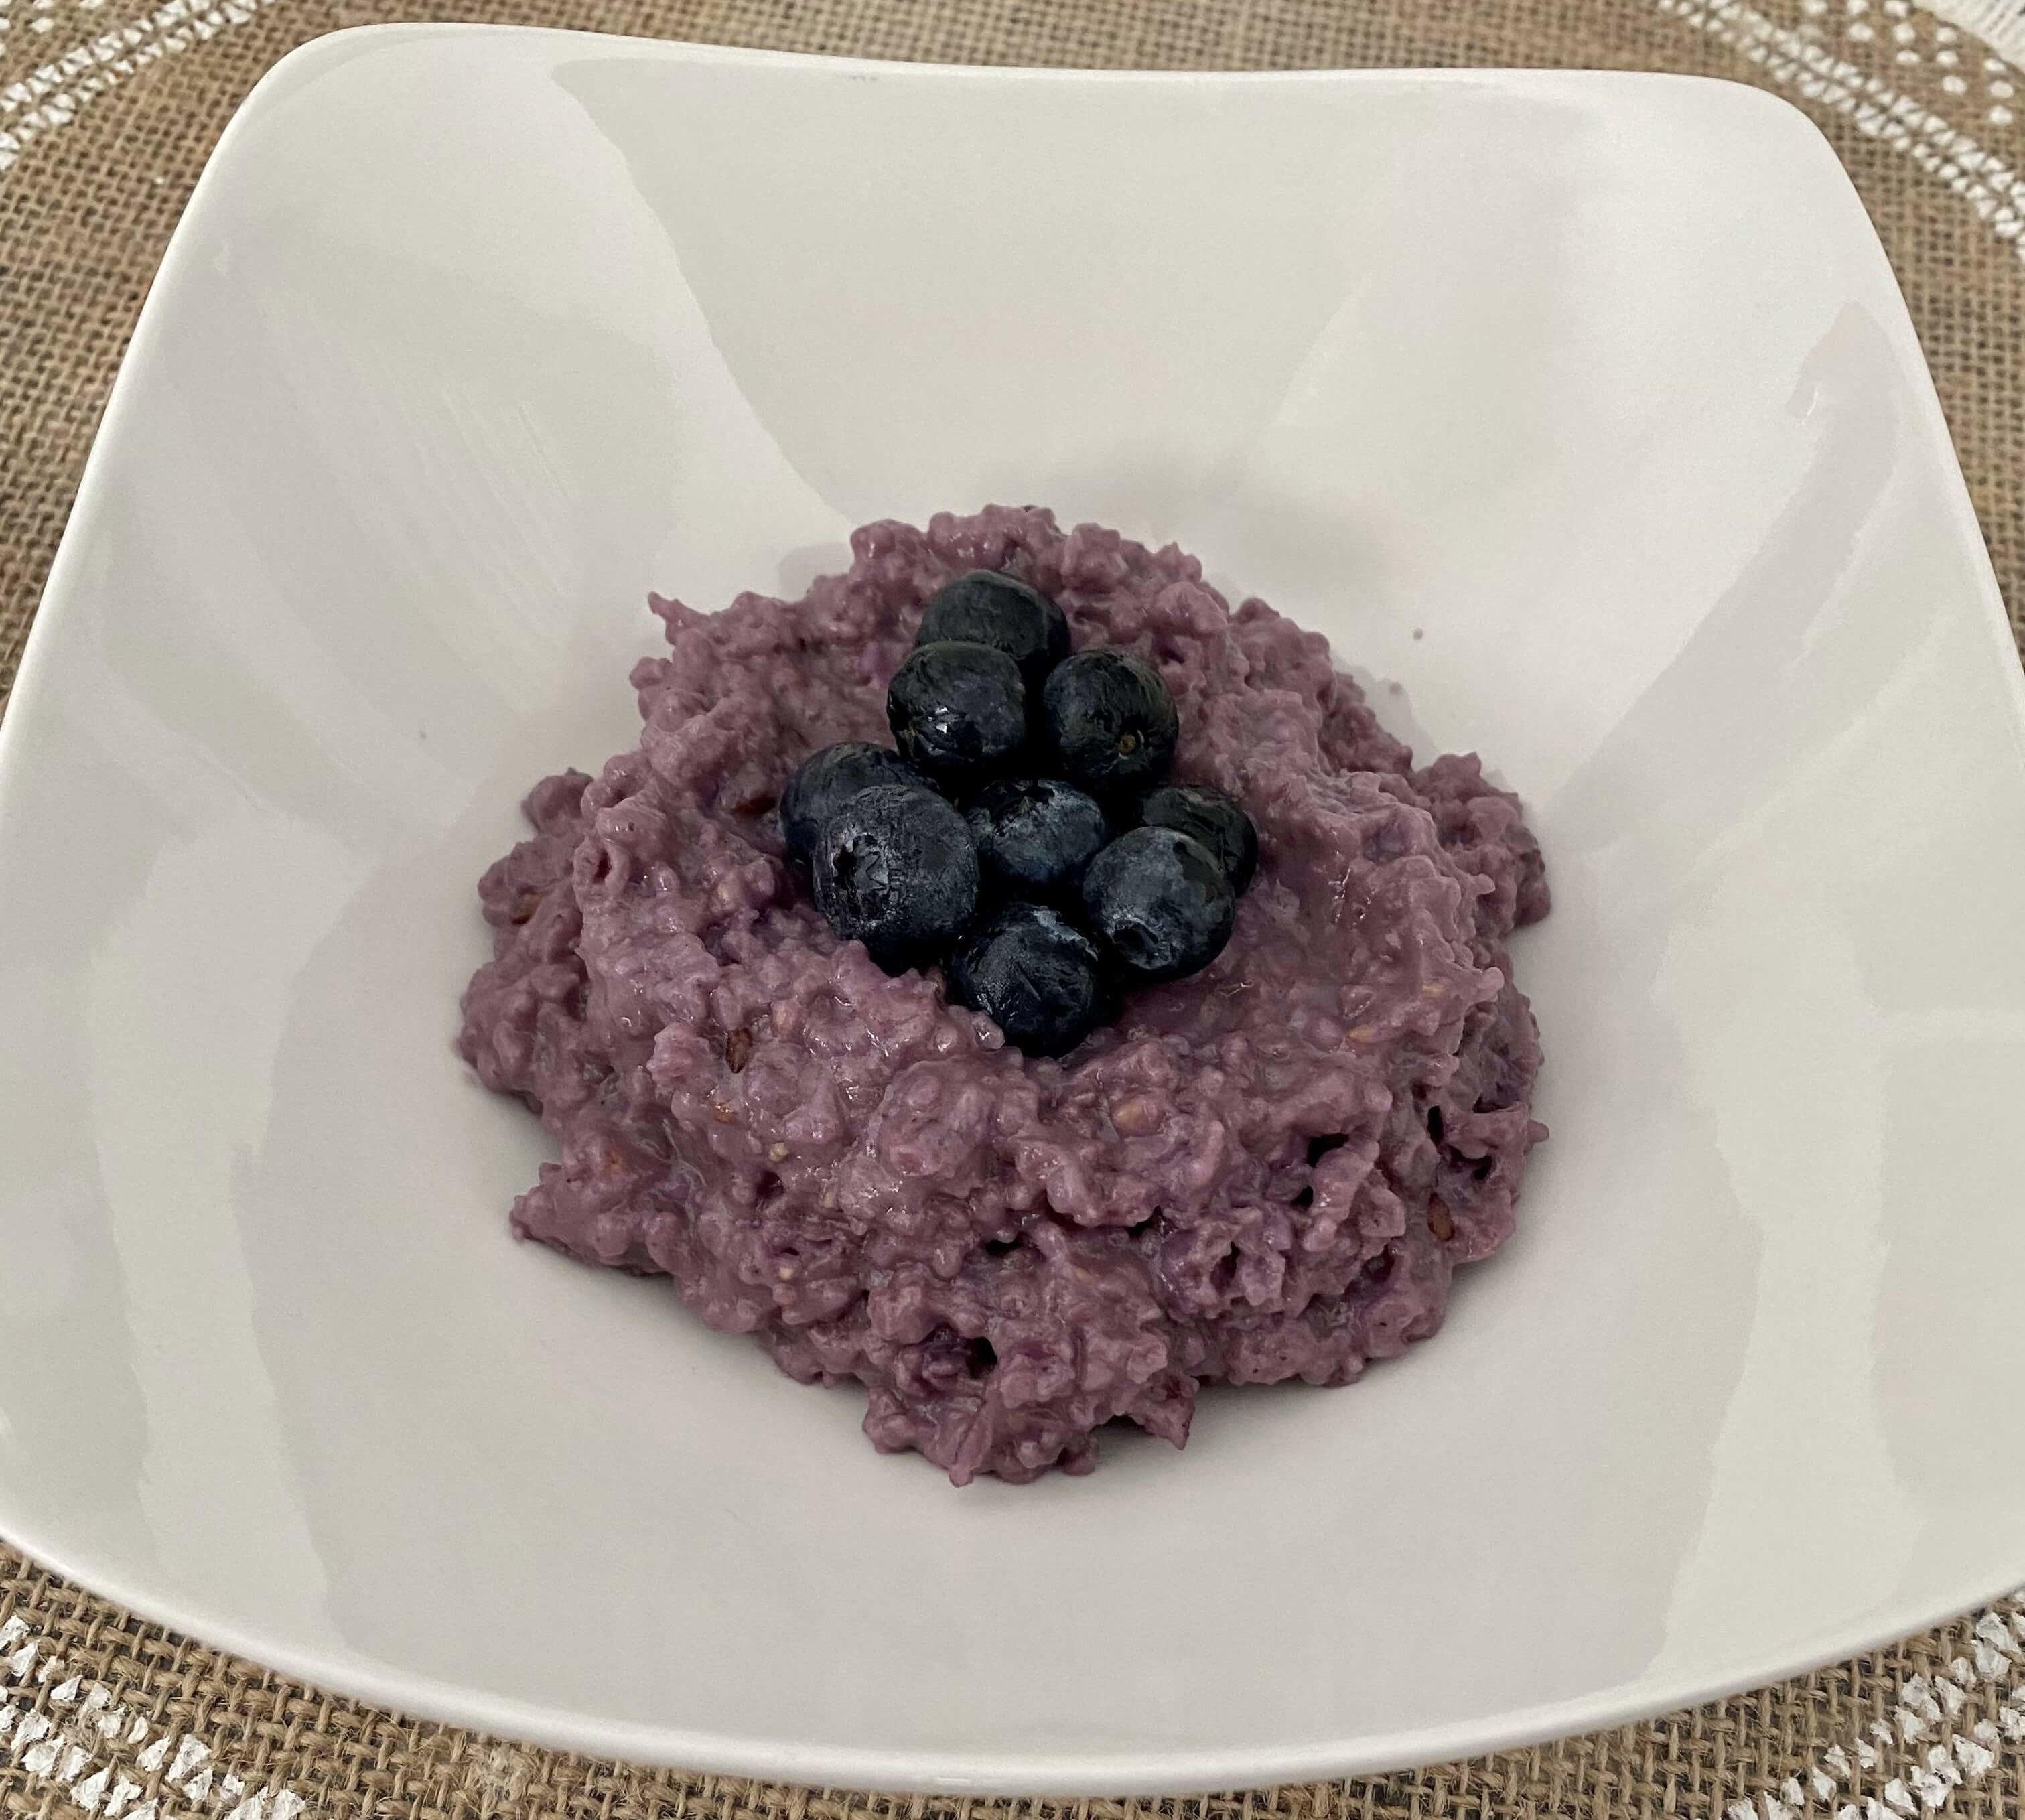 Purple berry oatmeal topped with blueberries on a white plate